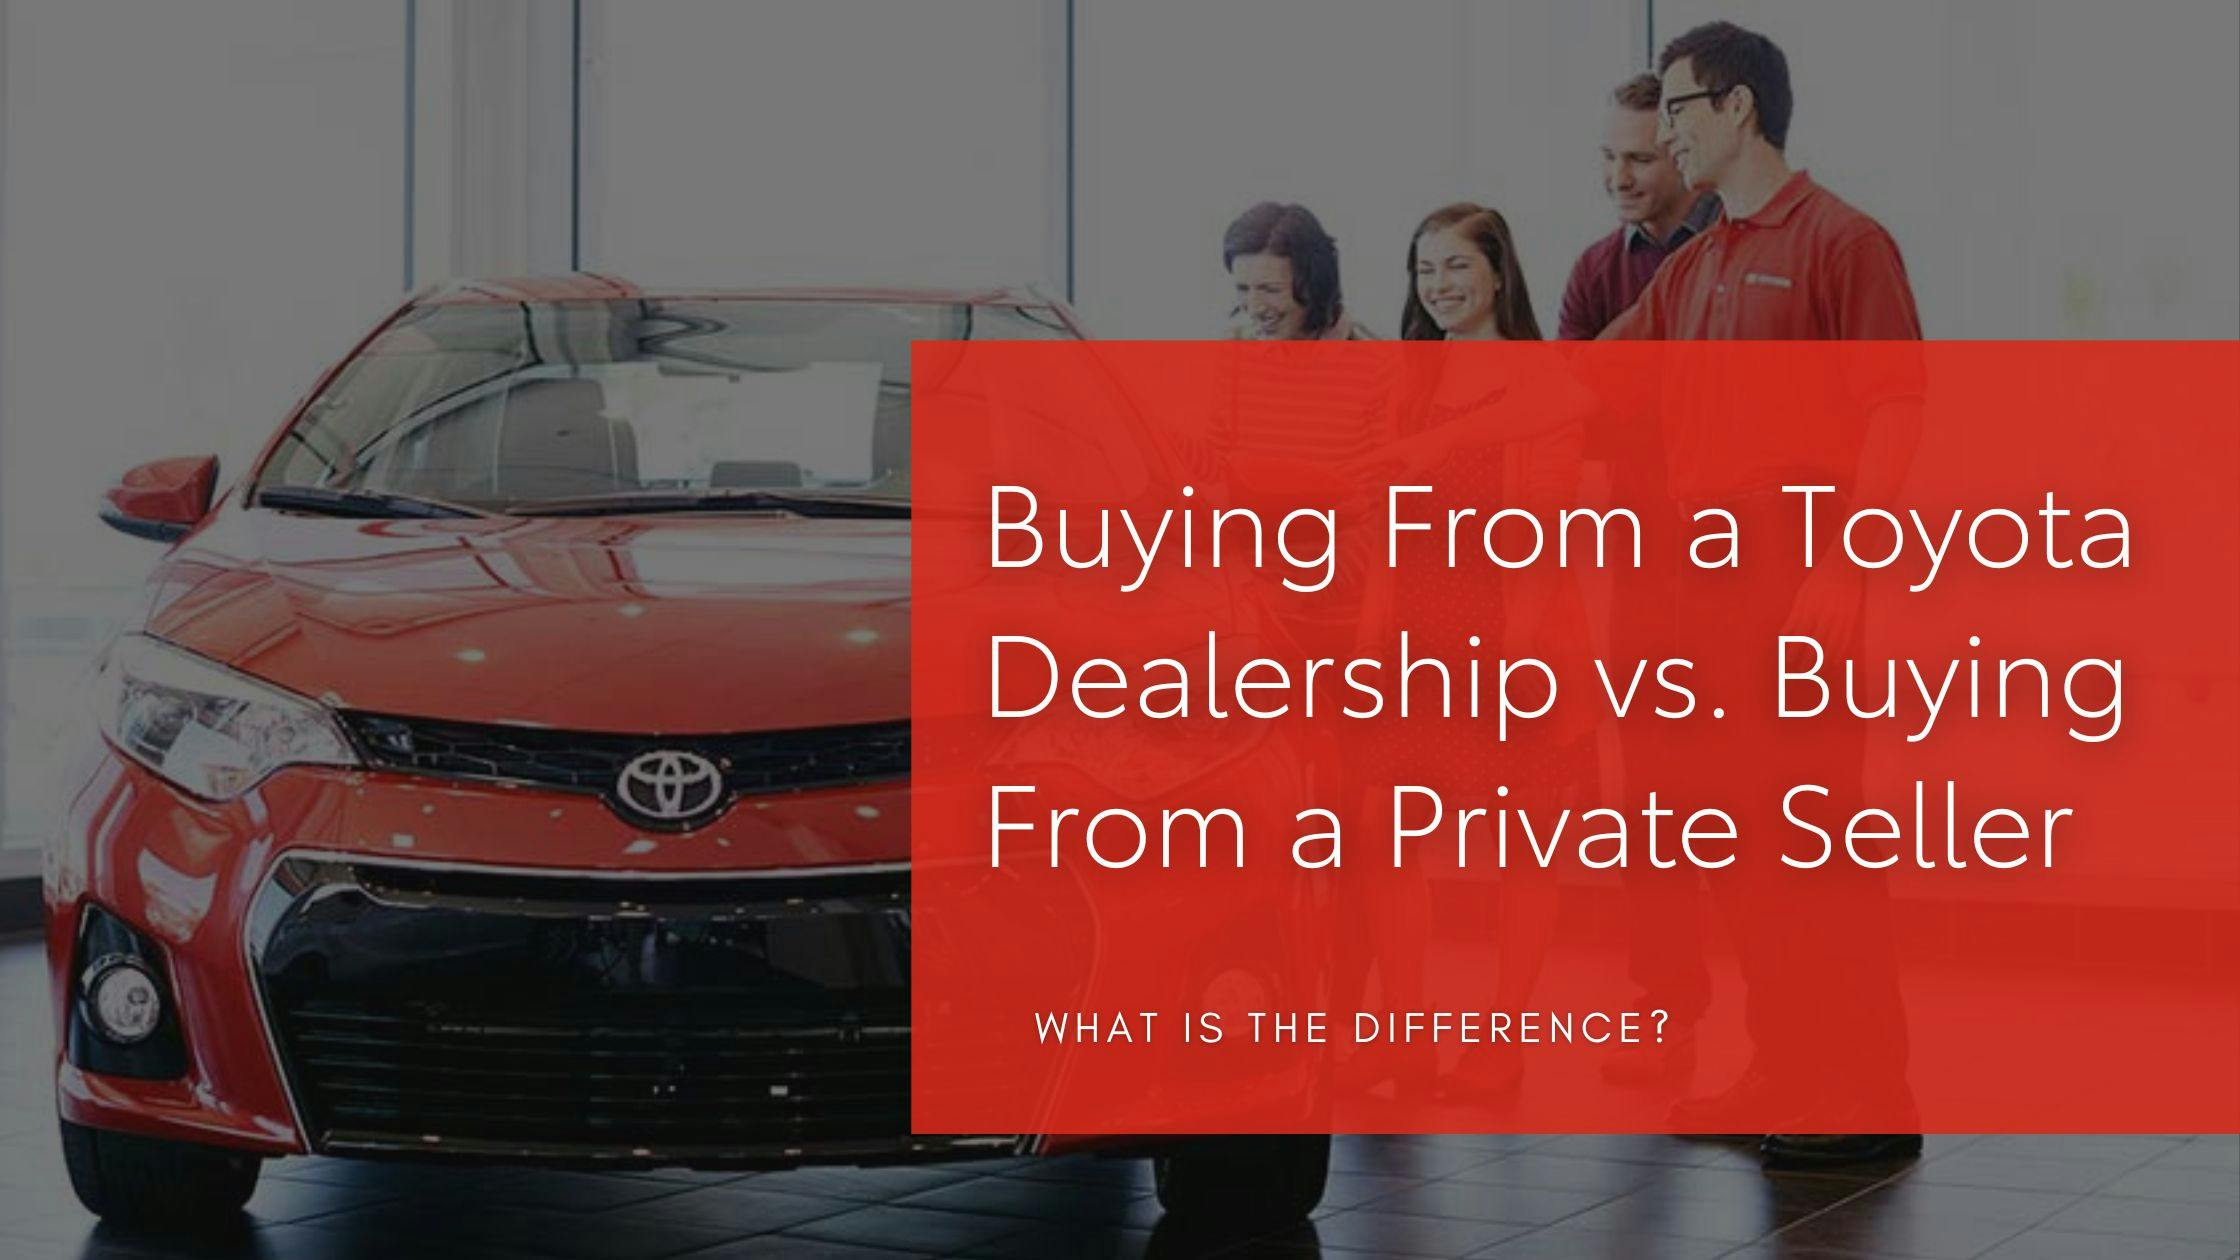 Buying From a Toyota Dealership vs. Buying From a Private Seller